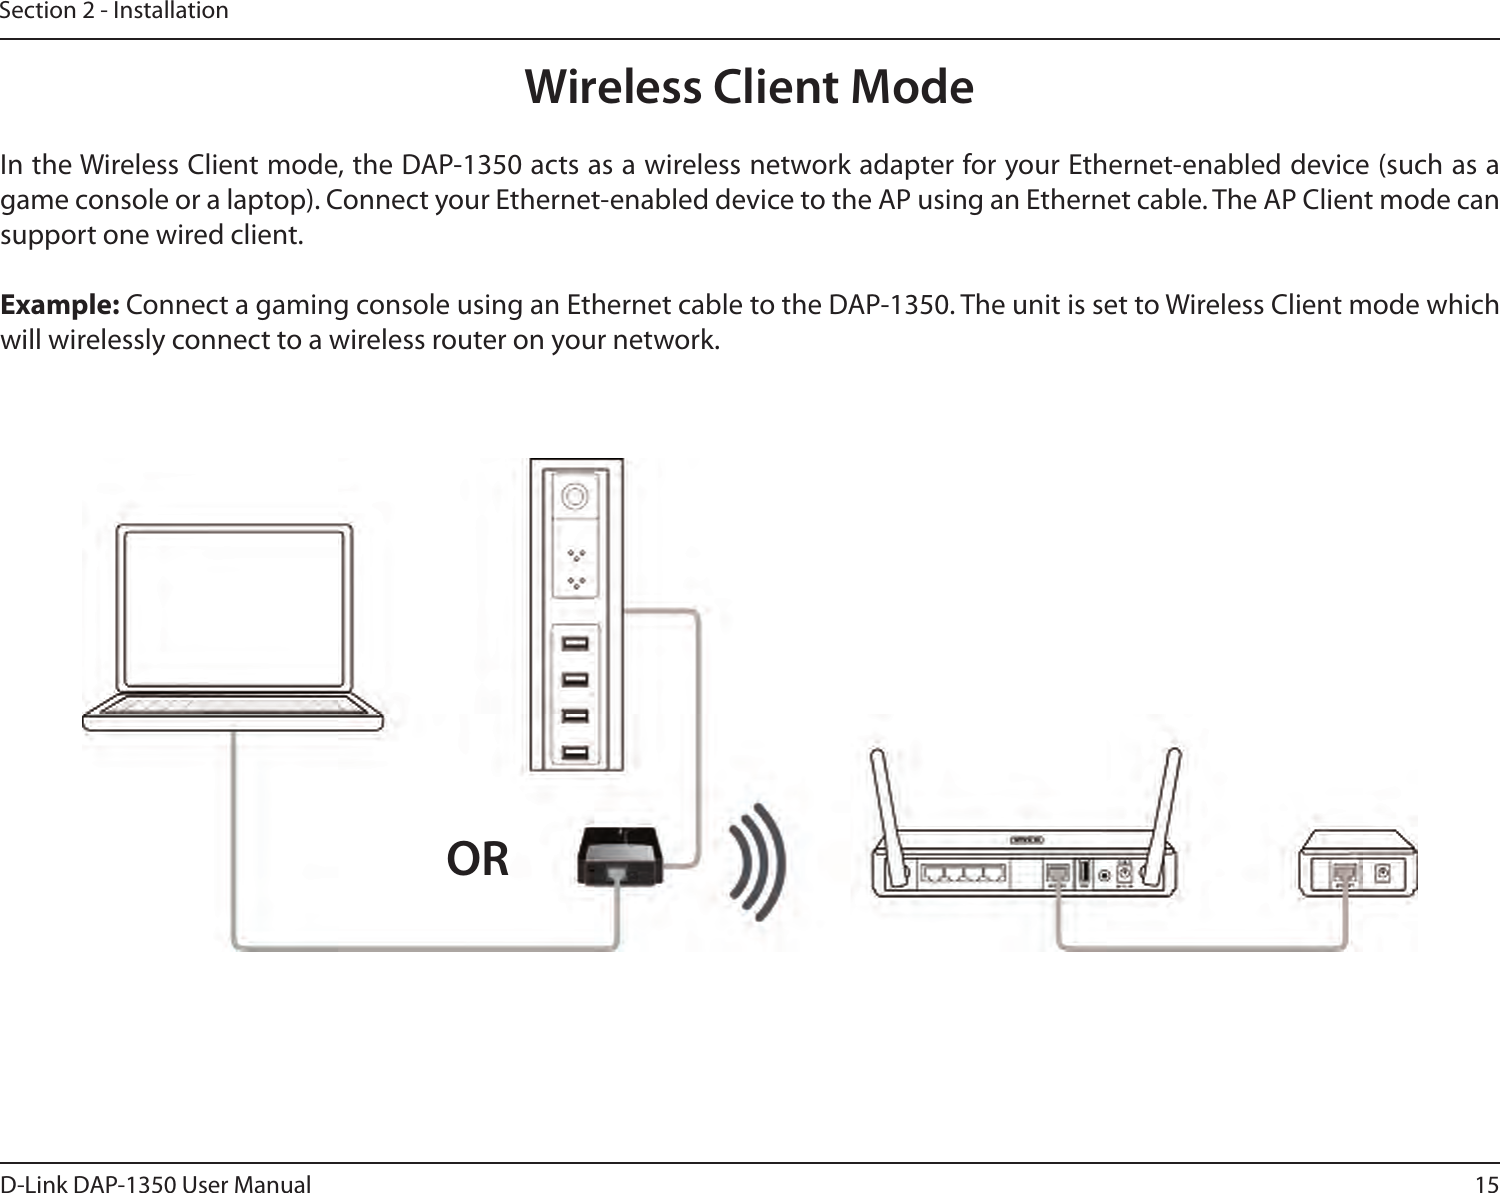 15D-Link DAP-1350 User ManualSection 2 - InstallationWireless Client ModeIn the Wireless Client mode, the DAP-1350 acts as a wireless network adapter for your Ethernet-enabled device (such as a game console or a laptop). Connect your Ethernet-enabled device to the AP using an Ethernet cable. The AP Client mode can support one wired client.Example: Connect a gaming console using an Ethernet cable to the DAP-1350. The unit is set to Wireless Client mode which will wirelessly connect to a wireless router on your network.OR